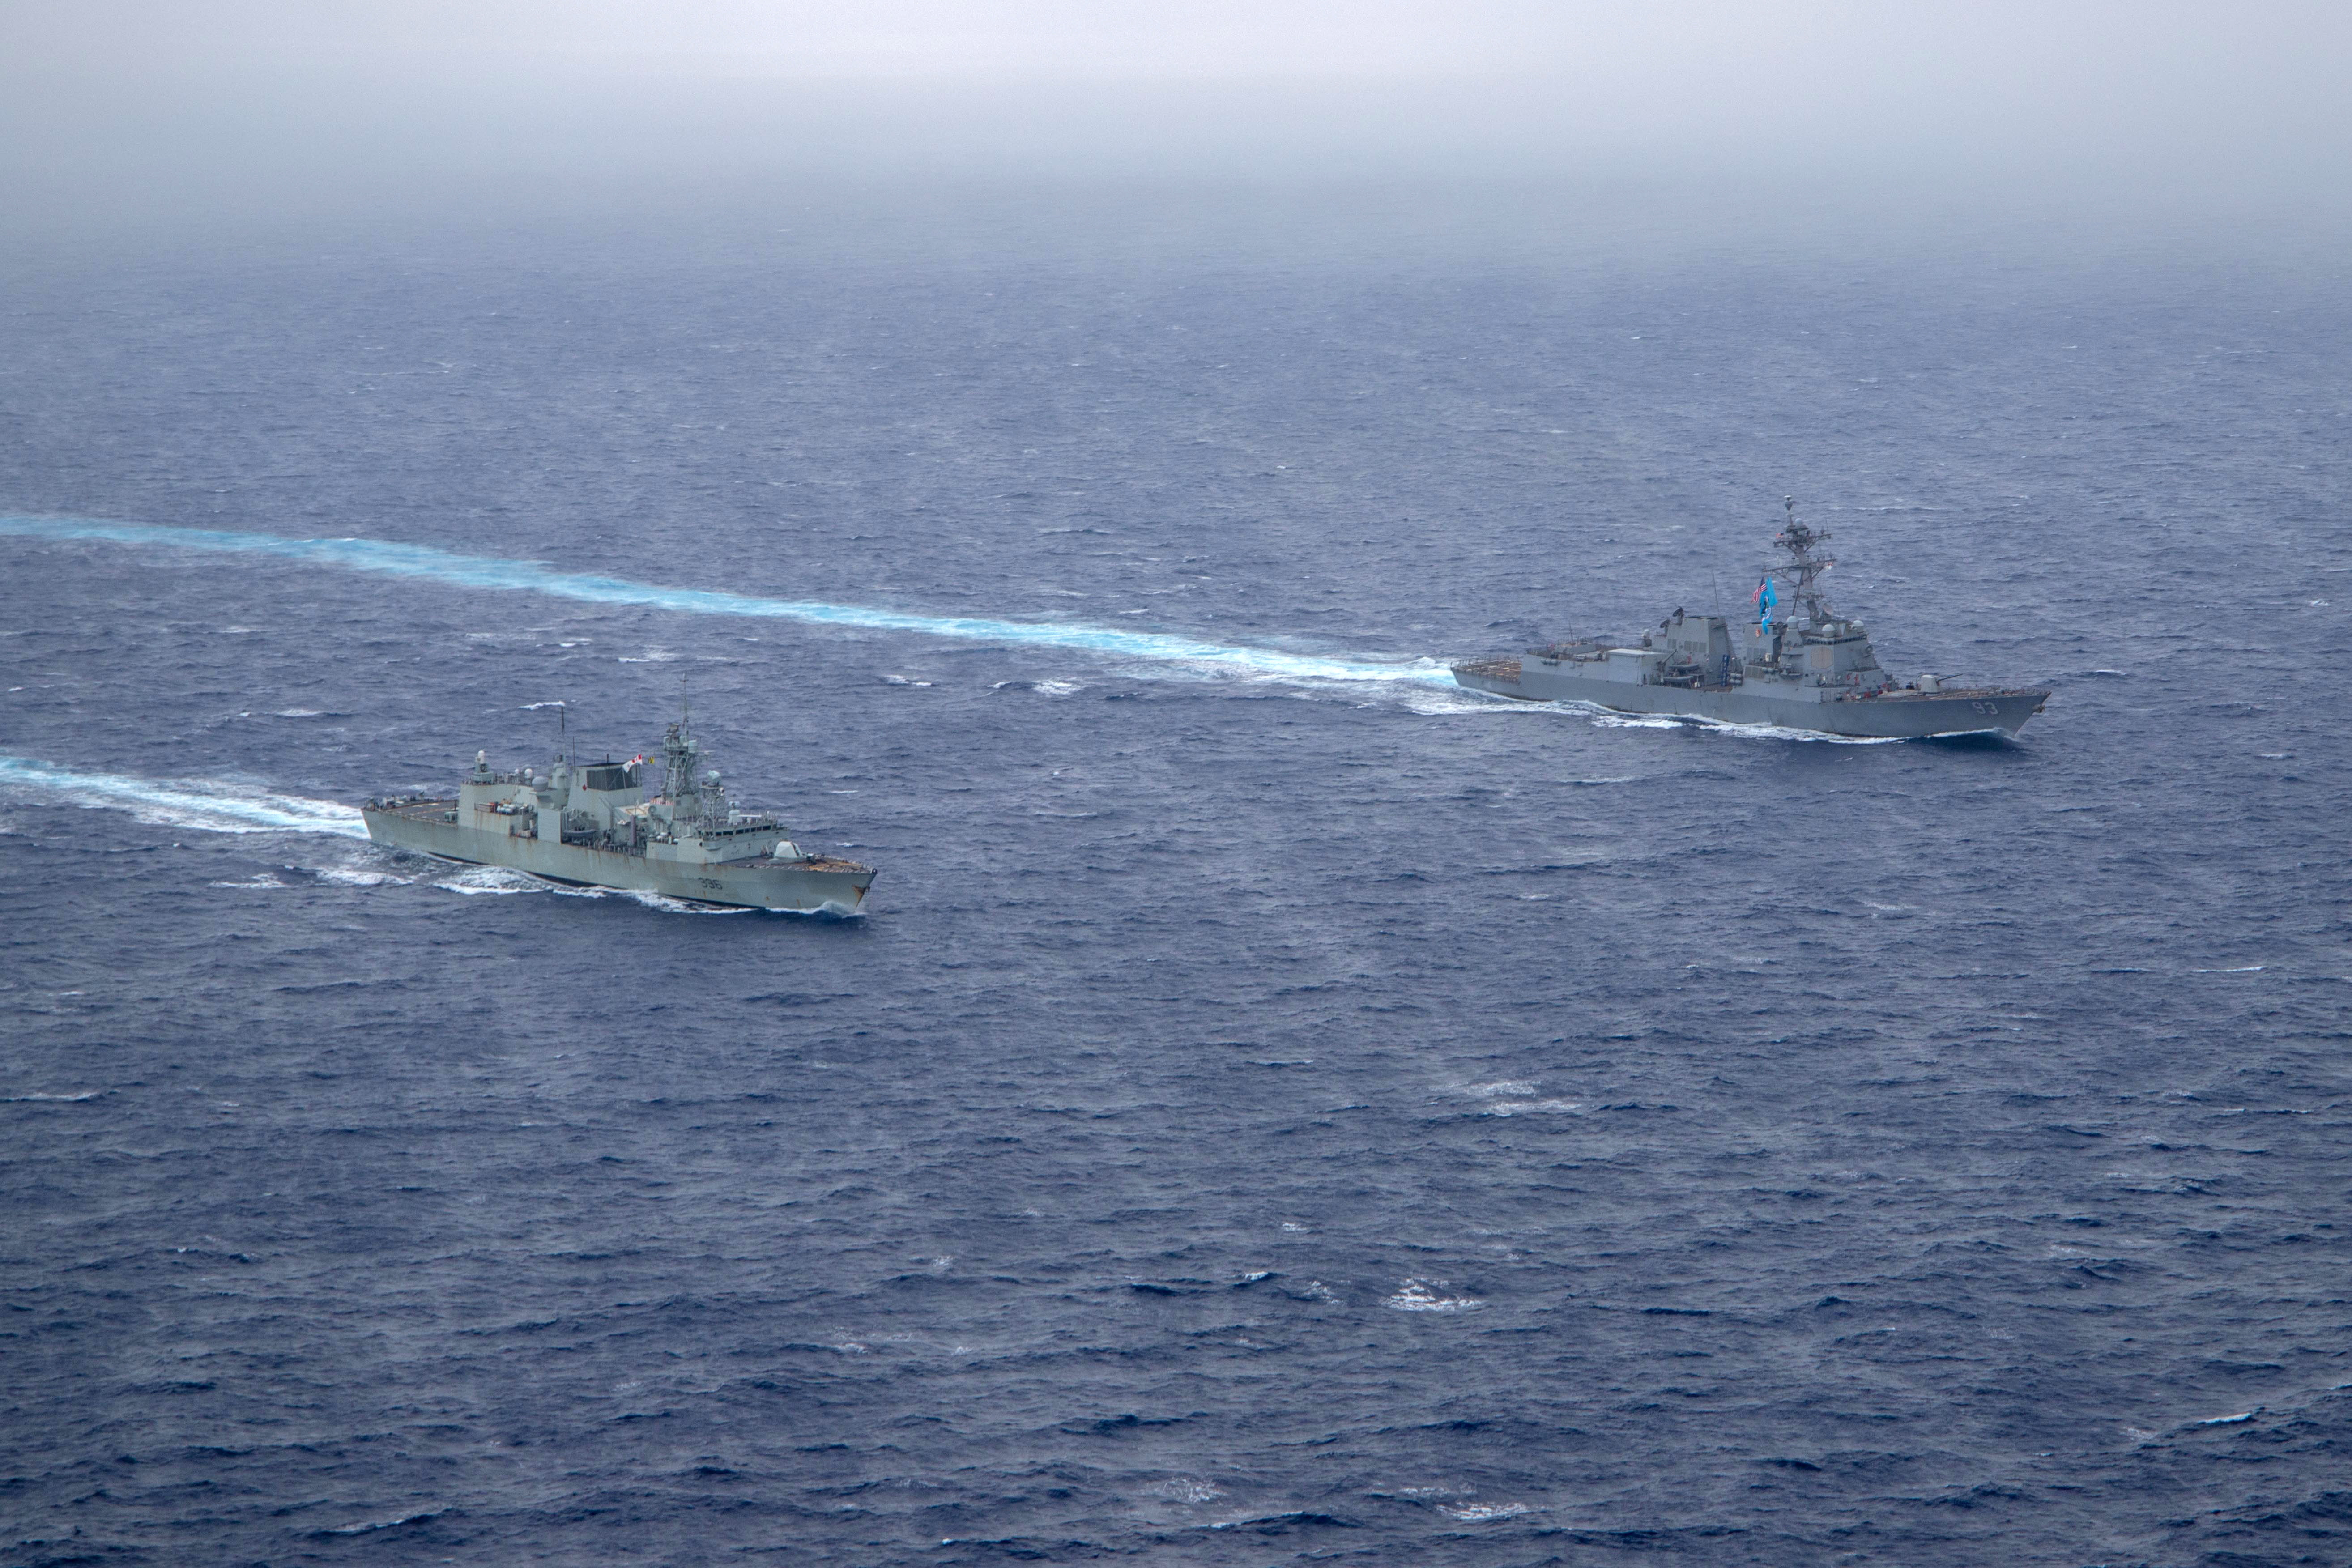 Chinese warship passed in 'unsafe manner' near destroyer in Taiwan Strait,  US says | Reuters